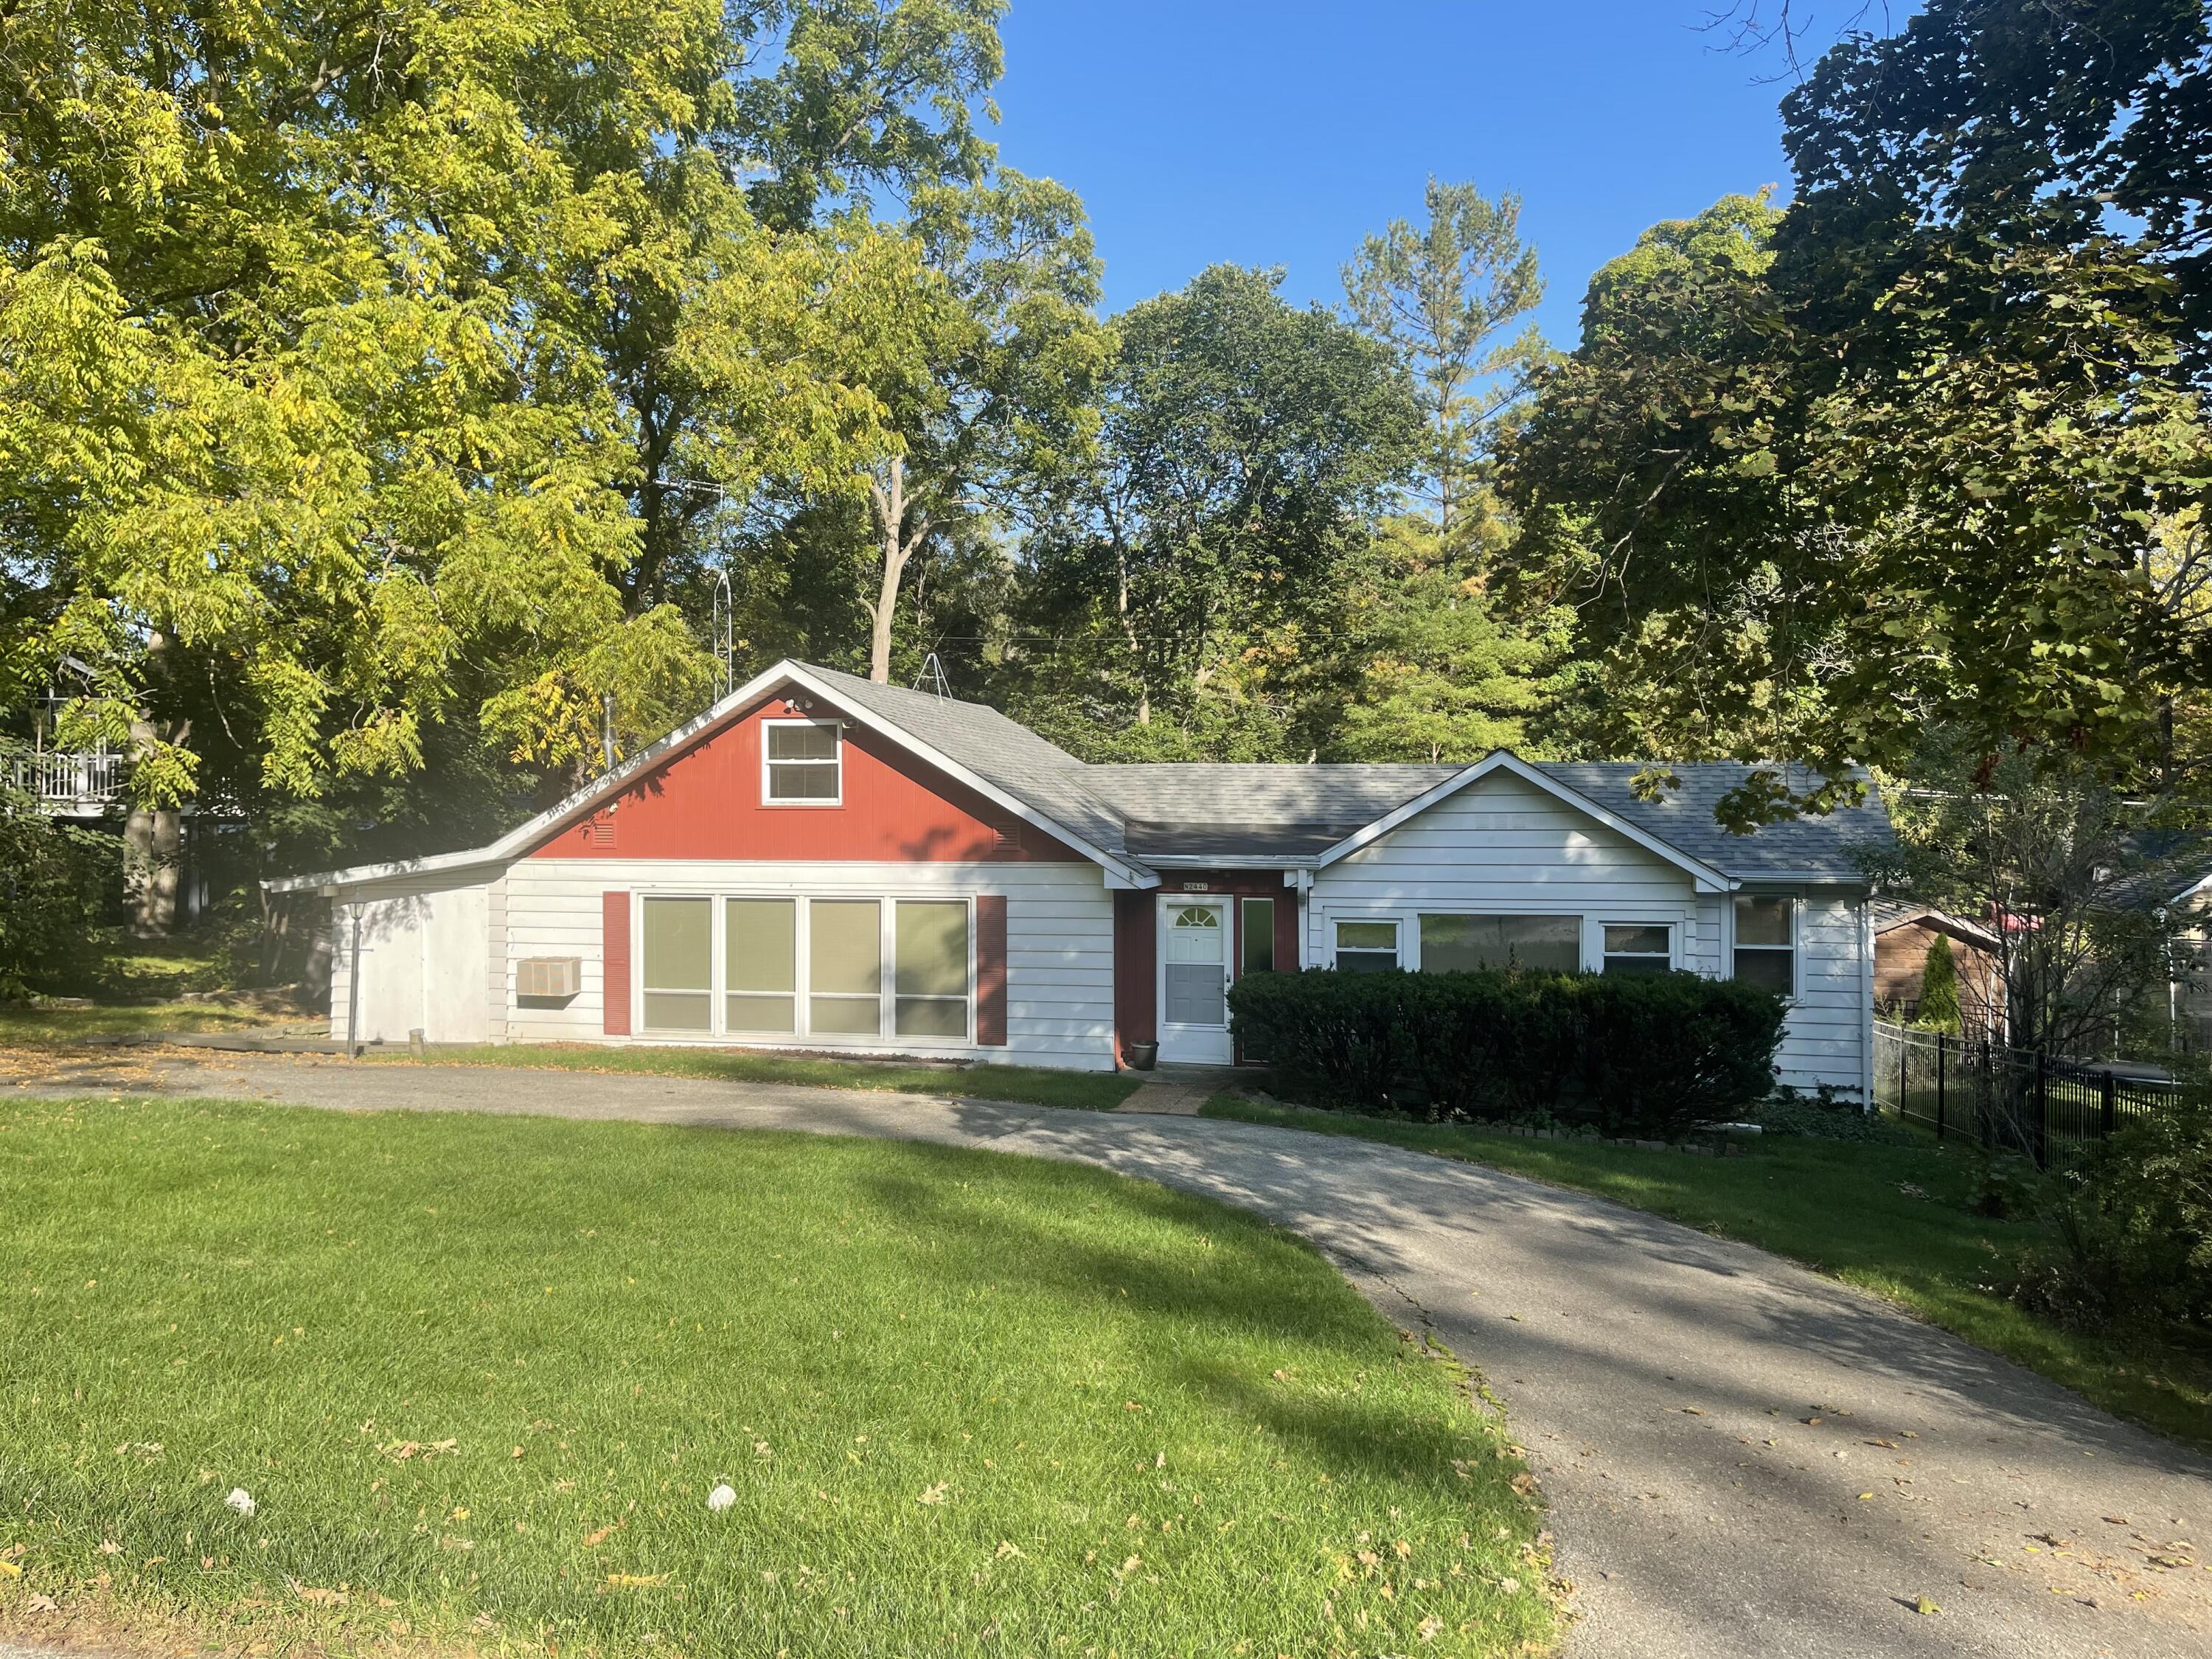 Linn wi home for sale